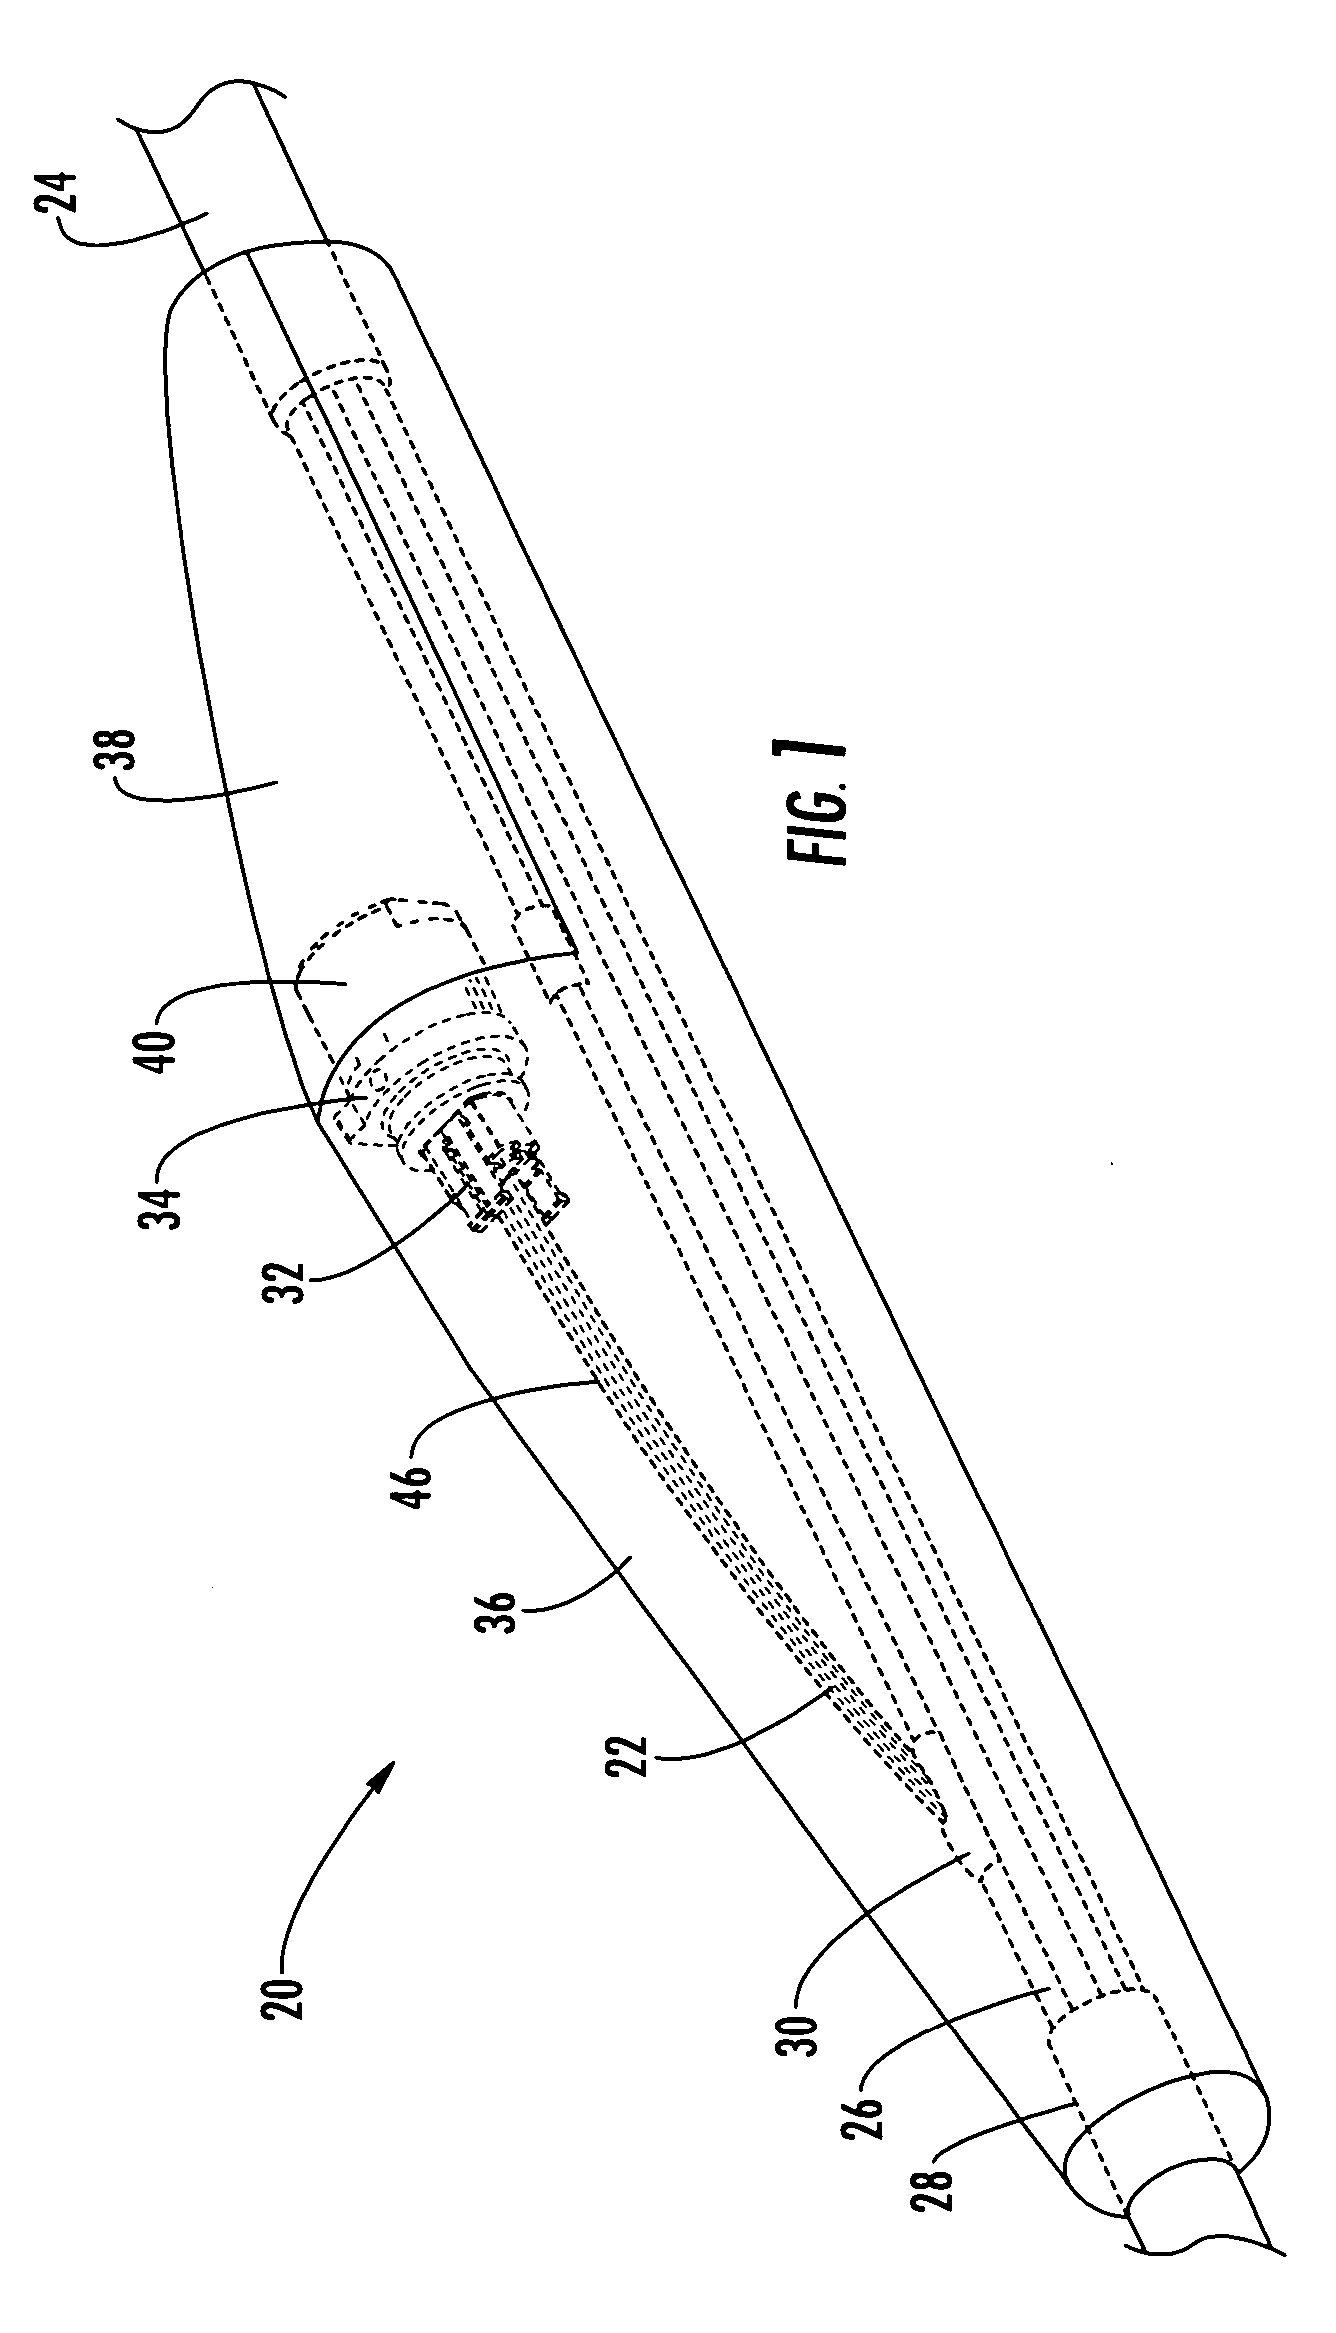 Pre-connectorized fiber optic distribution cable having overmolded access location